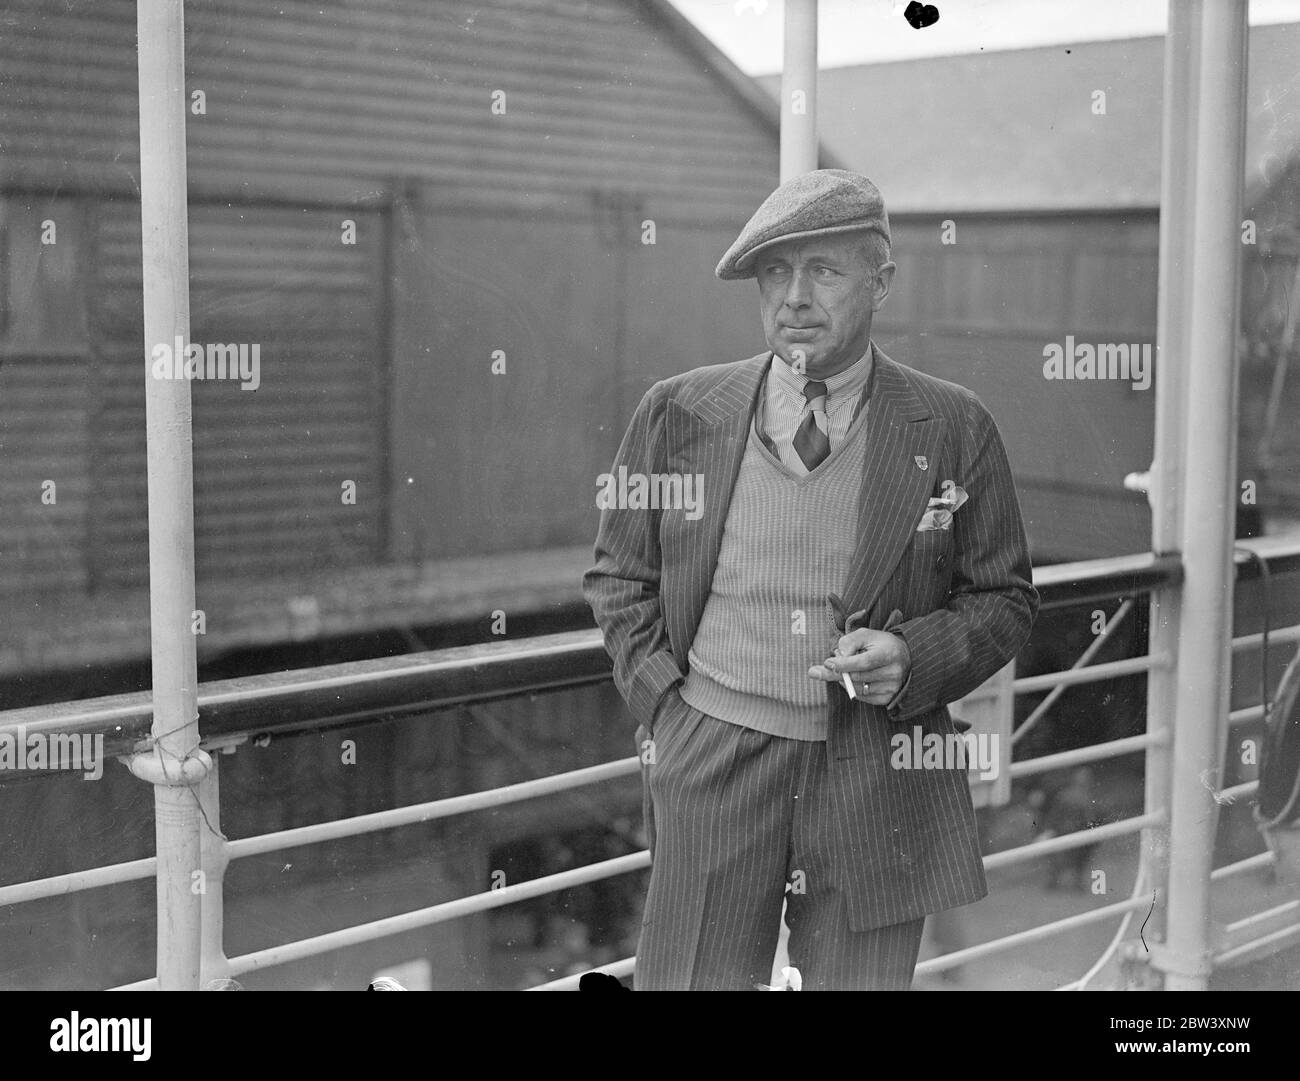 Earl Howe arrives home from South Africa with his wife . Earl Howe , the racing motorist , who was married in South Africa recently arrived at Southampton aboard the liner Athlone Castle with his wife from Cape Town . Earl Howe has been motor racing in South Africa . Photo shows , Earl Howe at Southampton . 19 March 1937 Stock Photo